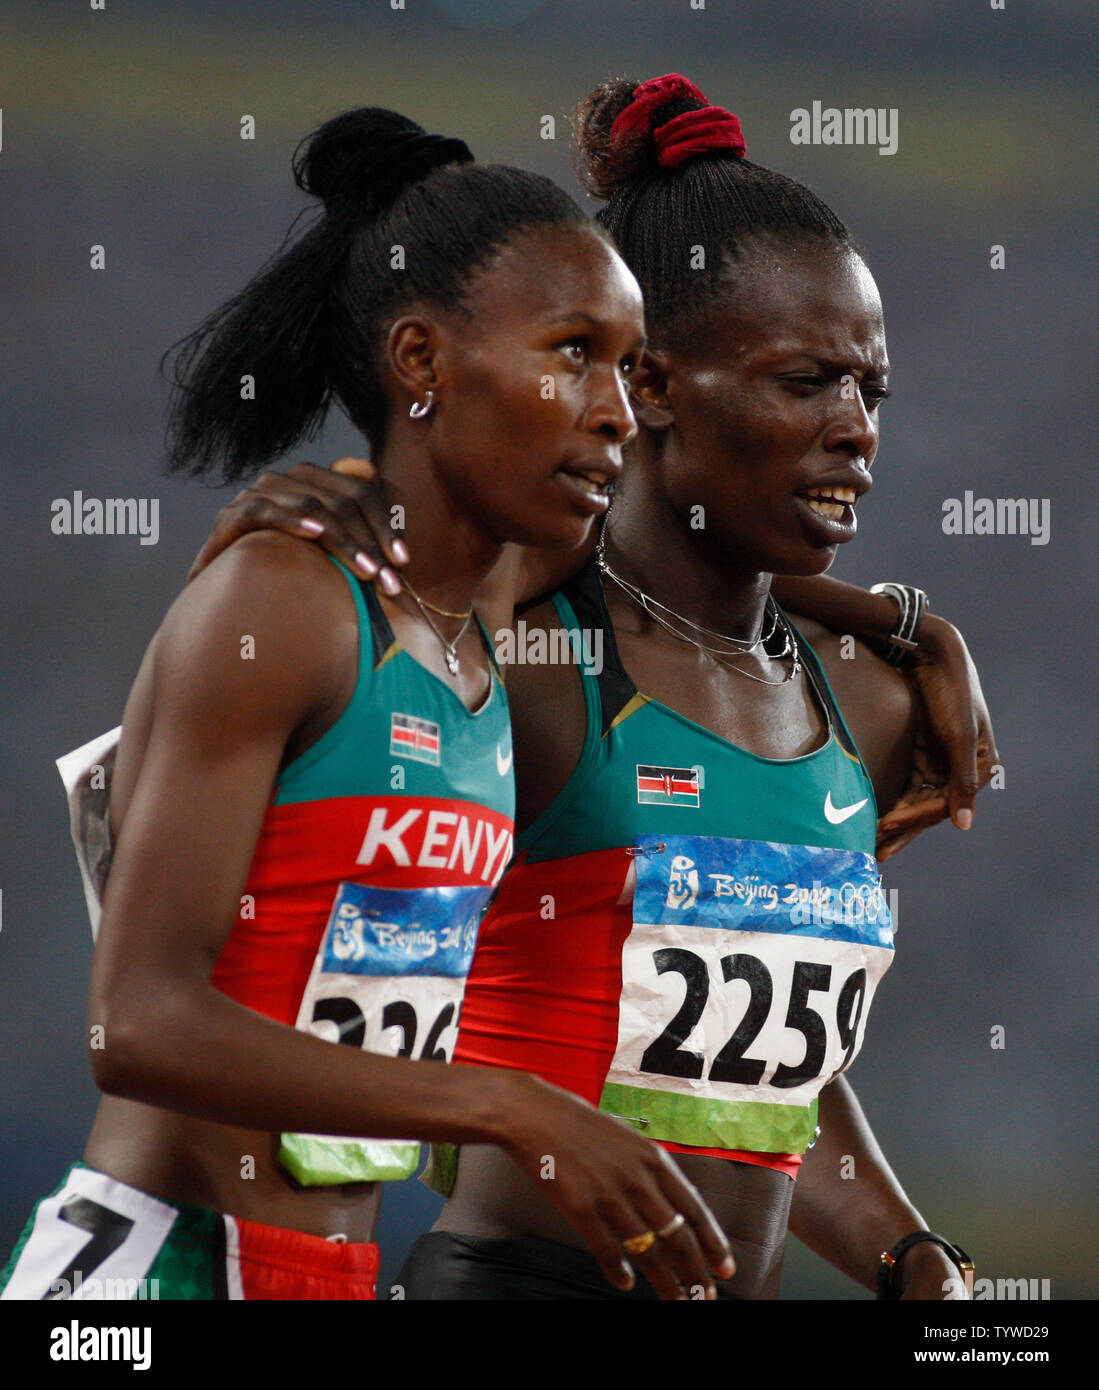 Keyna's Pamela Jelimo (2259) and Janeth Jepkosgei Busienei (2267) lead the pack in the finals of the women's 800m at the Summer Olympics in Beijing on August 18, 2008. Jelimo took the gold with a time of 1:54.87 and Busienei the silver at 1:56.07.   (UPI Photo/Terry Schmitt) Stock Photo